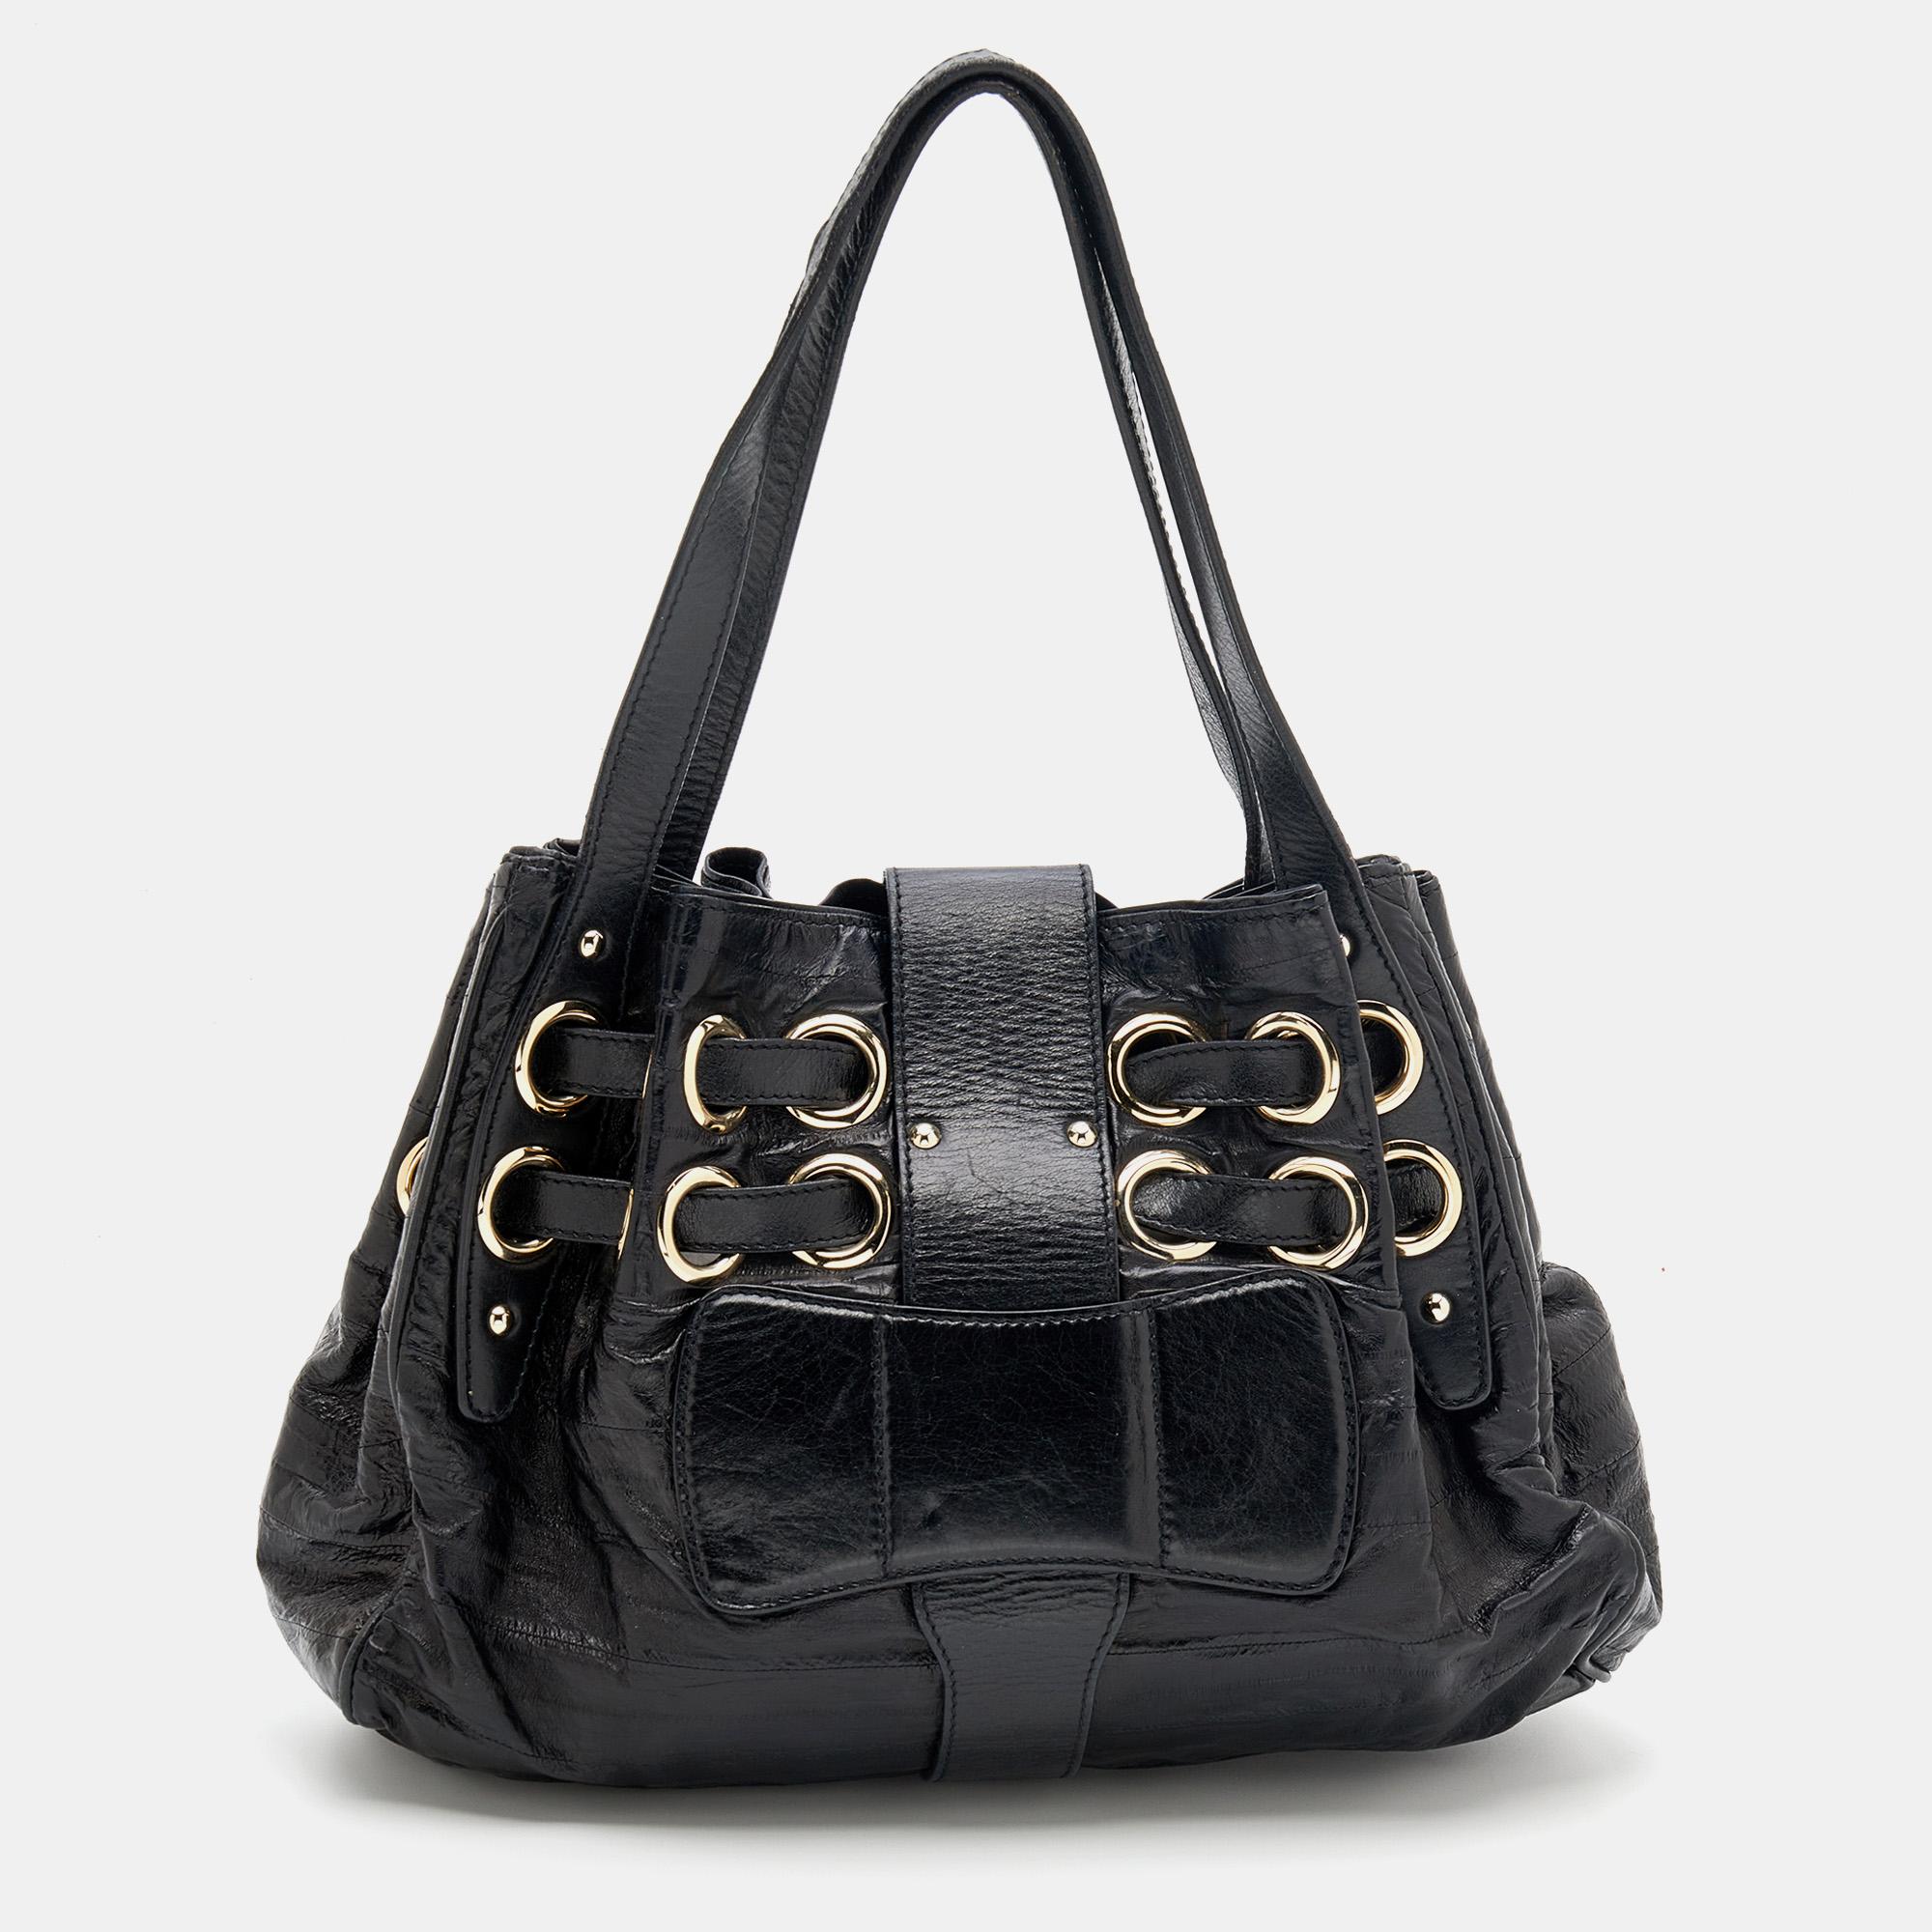 This Jimmy Choo Riki tote is a result of exquisite details and faultless craftsmanship. Created from leather, this bag rules the wishlist of style enthusiasts worldwide. It is made striking with two straps passing through the gold-tone eyelets, and